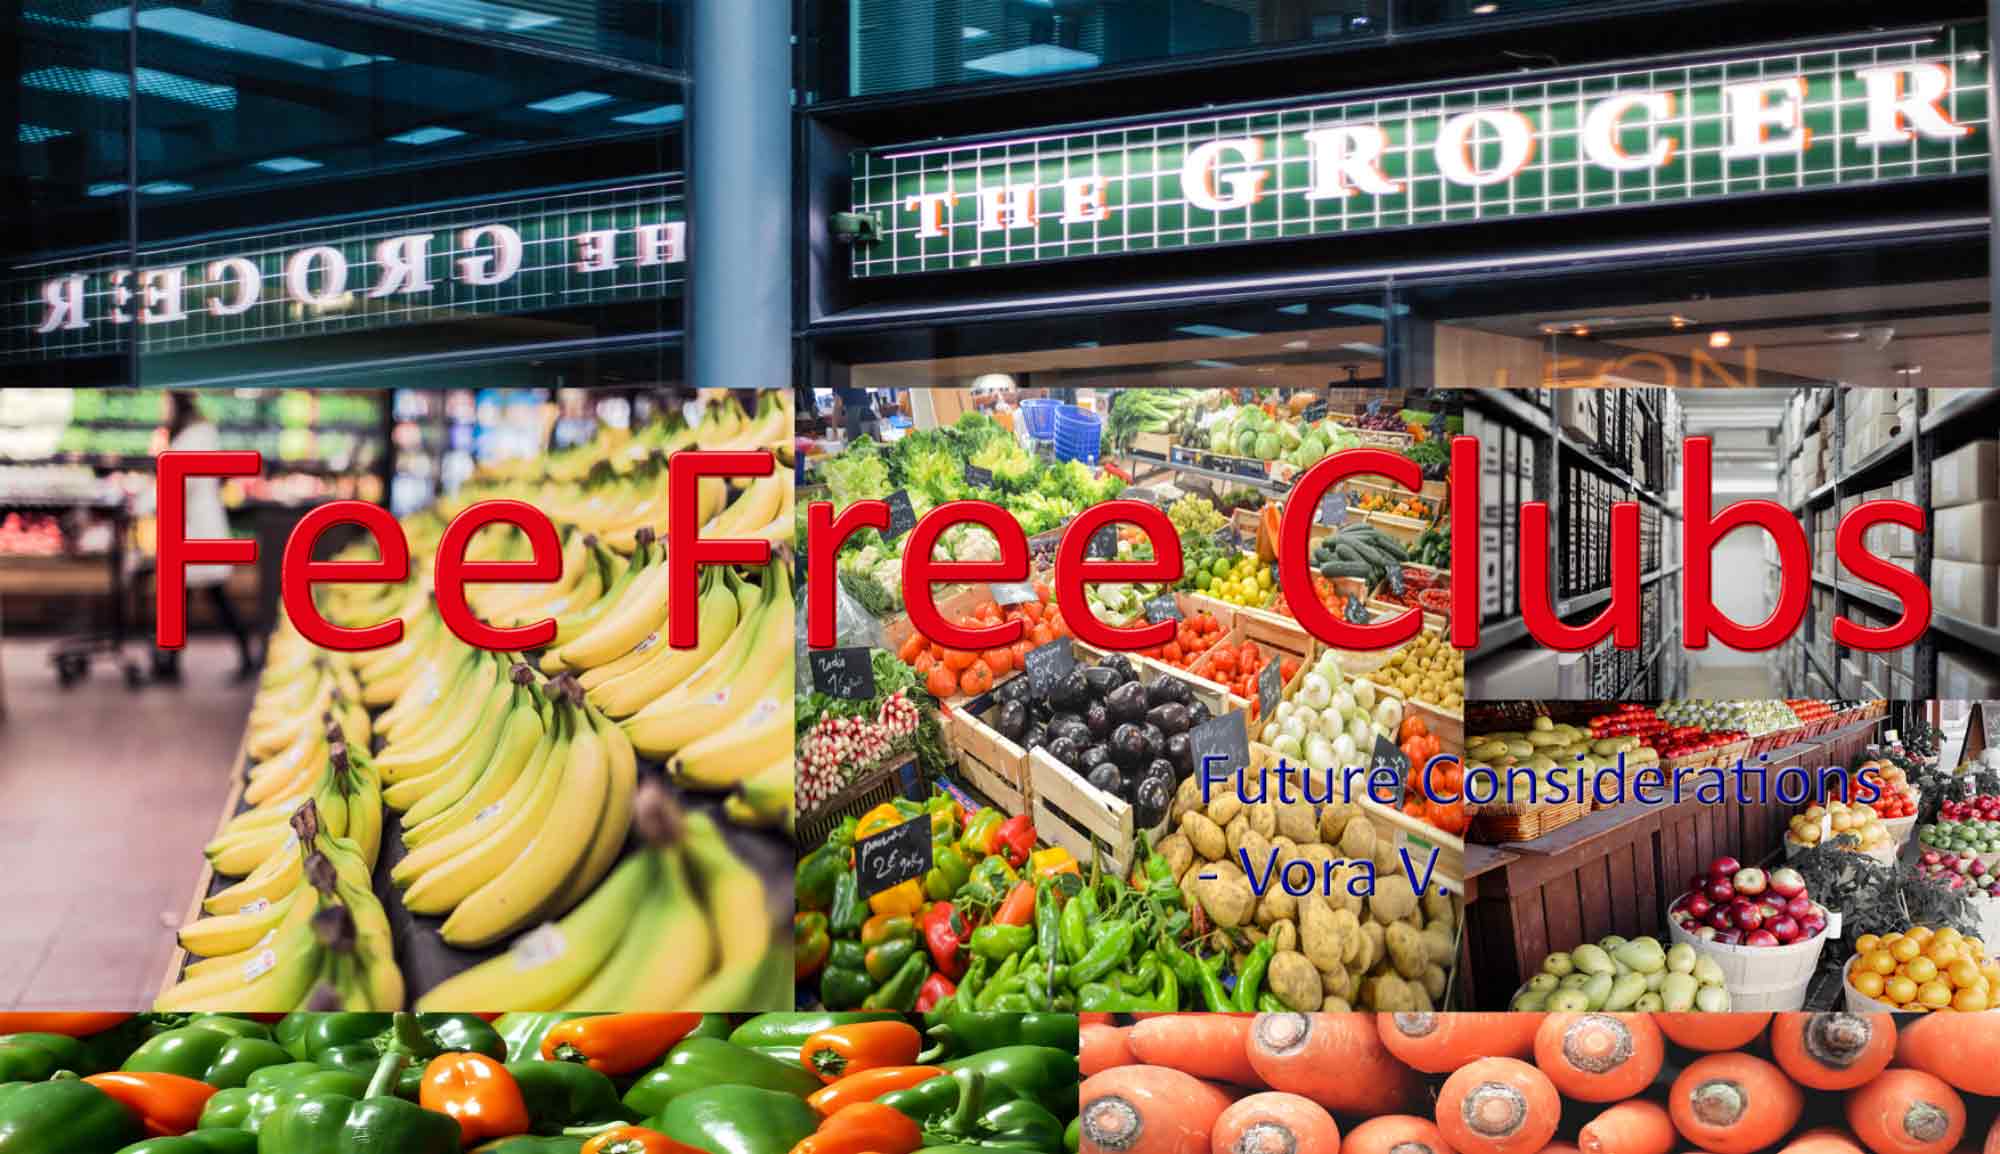 should these warehouse clubs raise their fees or make them fee free? ...